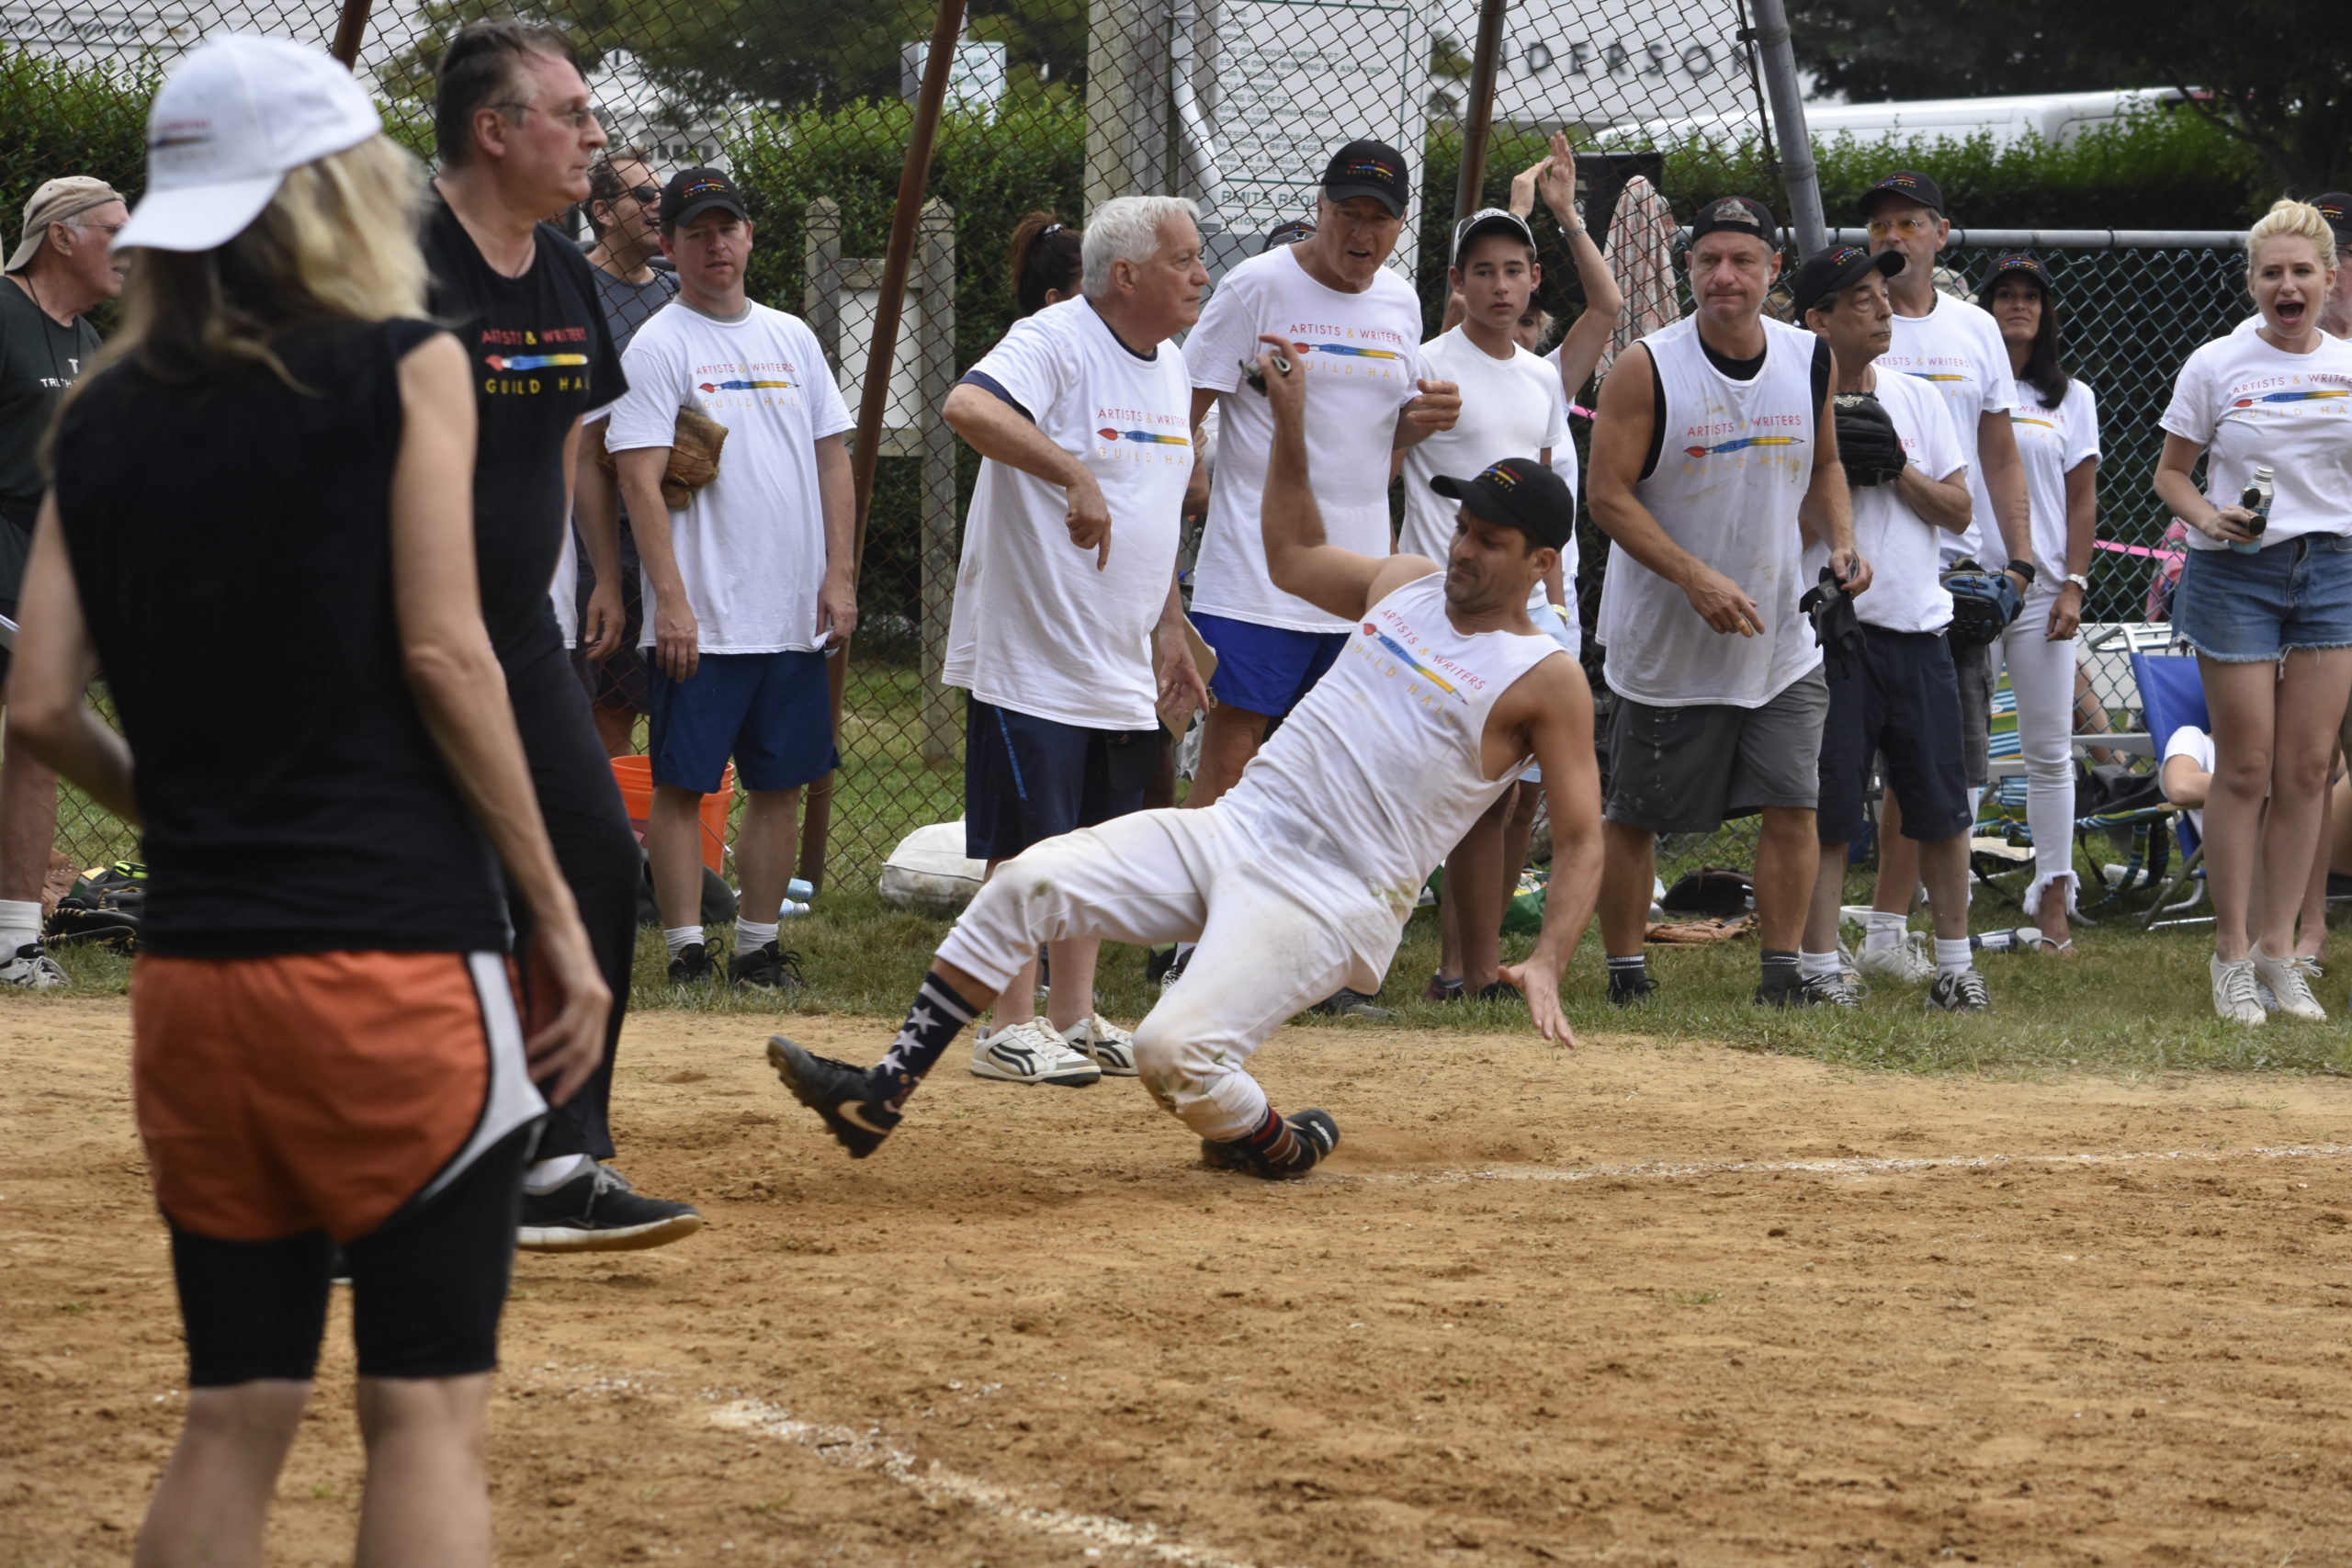 The 2019 Artists and Writers Charity Softball Game.  PRESS FILE